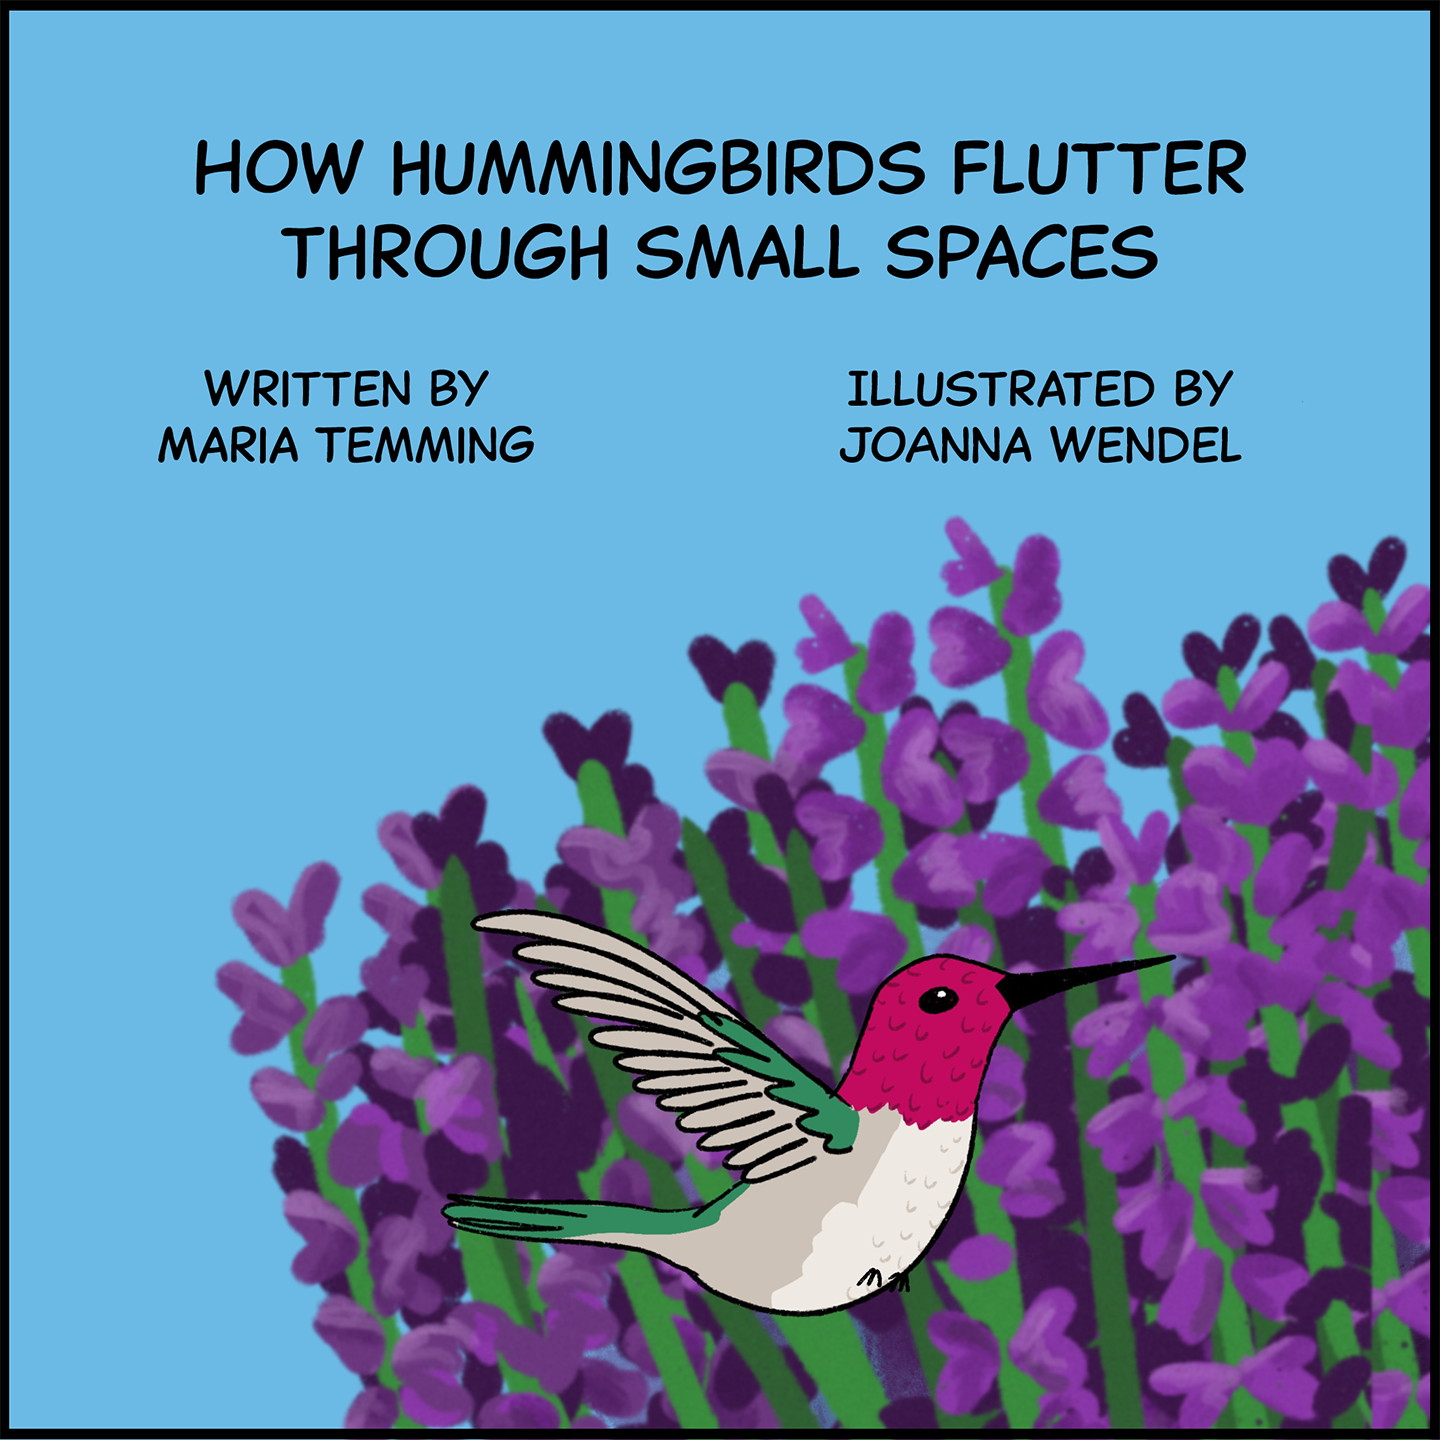 How hummingbirds flutter through small spaces. Written by Maria Temming. Illustrated by JoAnna Wendel. Image: A hummingbird with a magenta head, white body and some green on its wings and tail flies past a field of purple lavender flowers under a blue sky. 